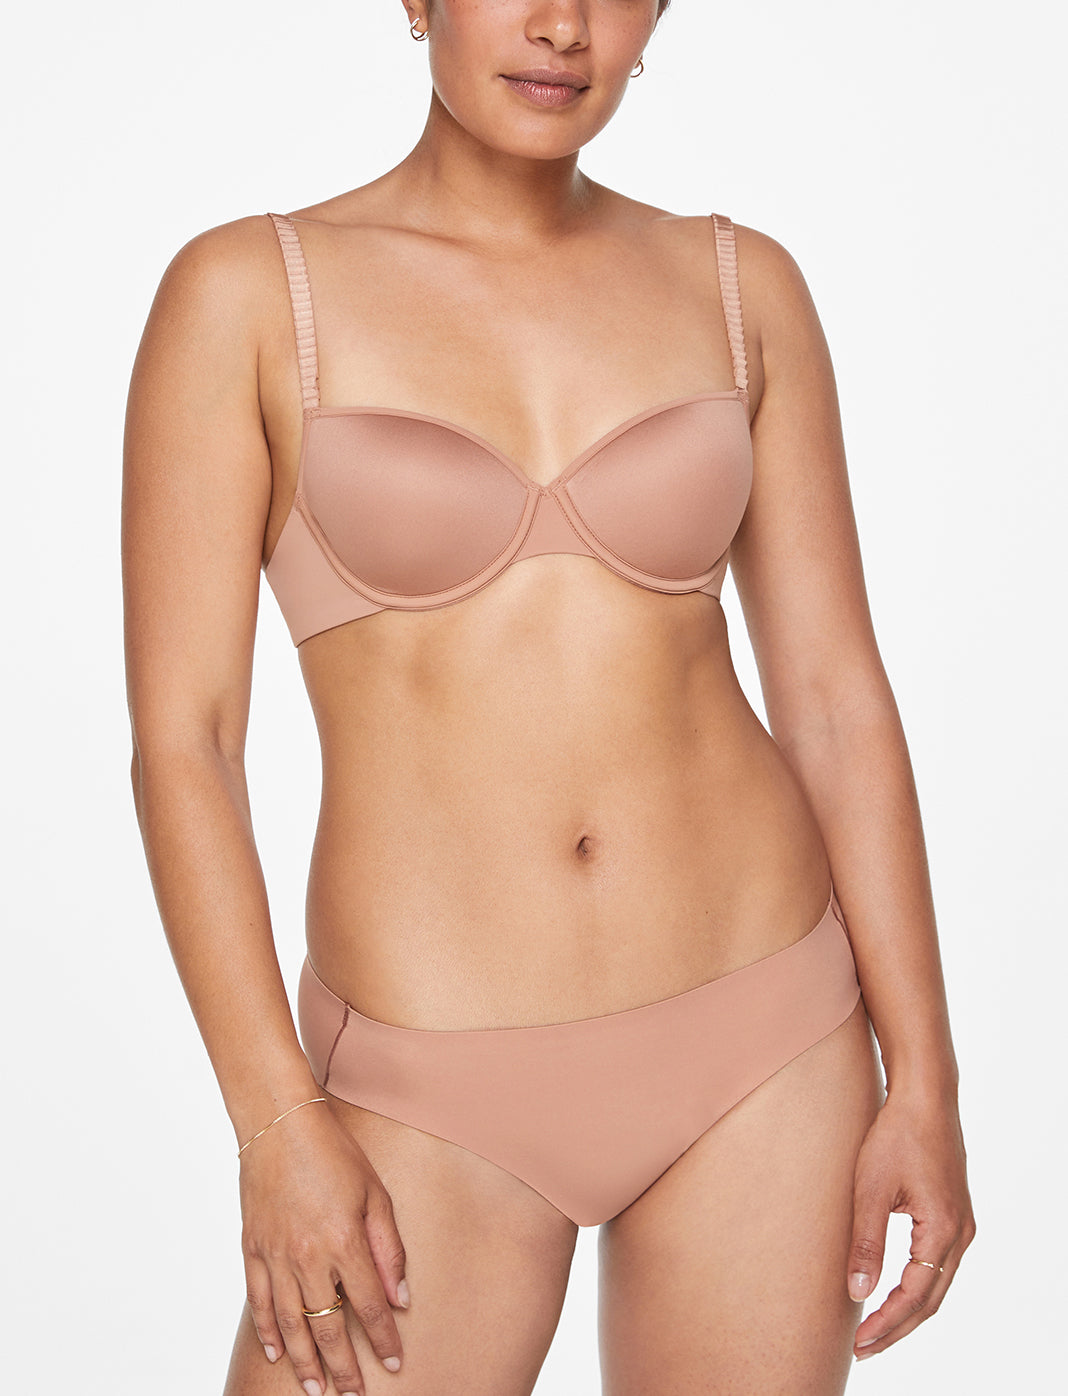 Thirdlove 24/7 Classic T-Shirt Soft Pink Bra Size 42C - $37 - From